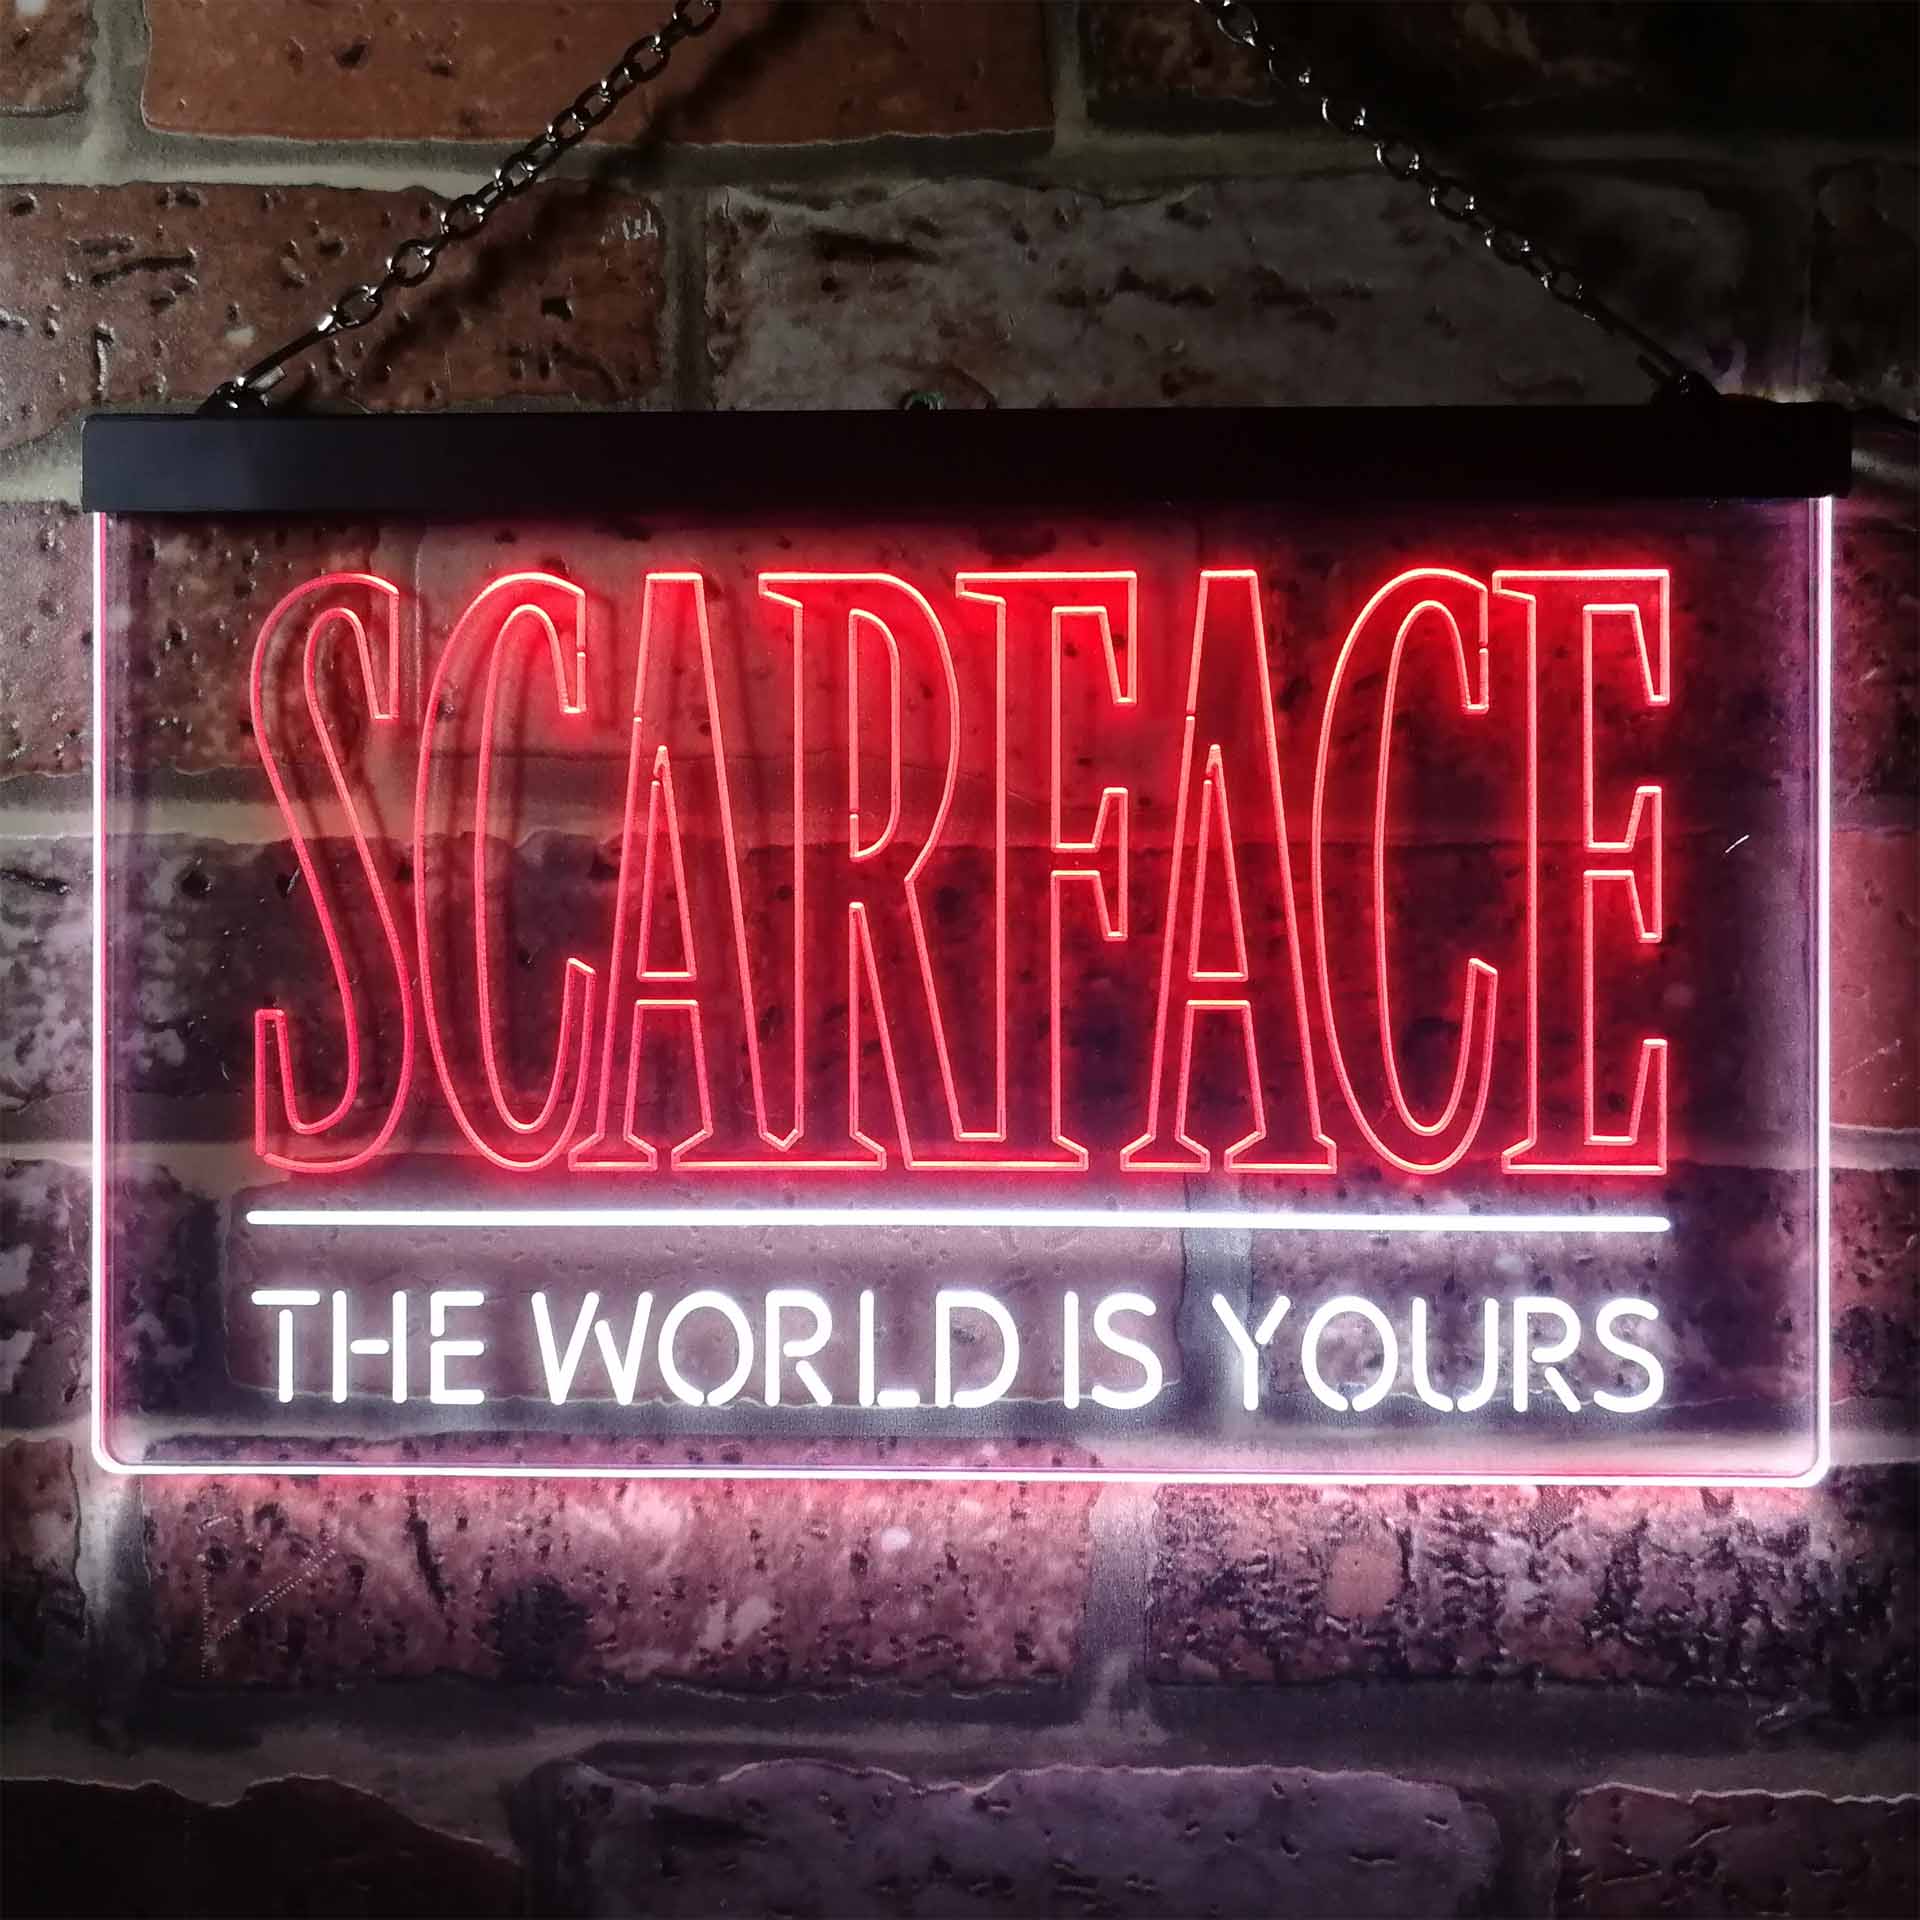 Scarface The World is Yours Neon LED Sign